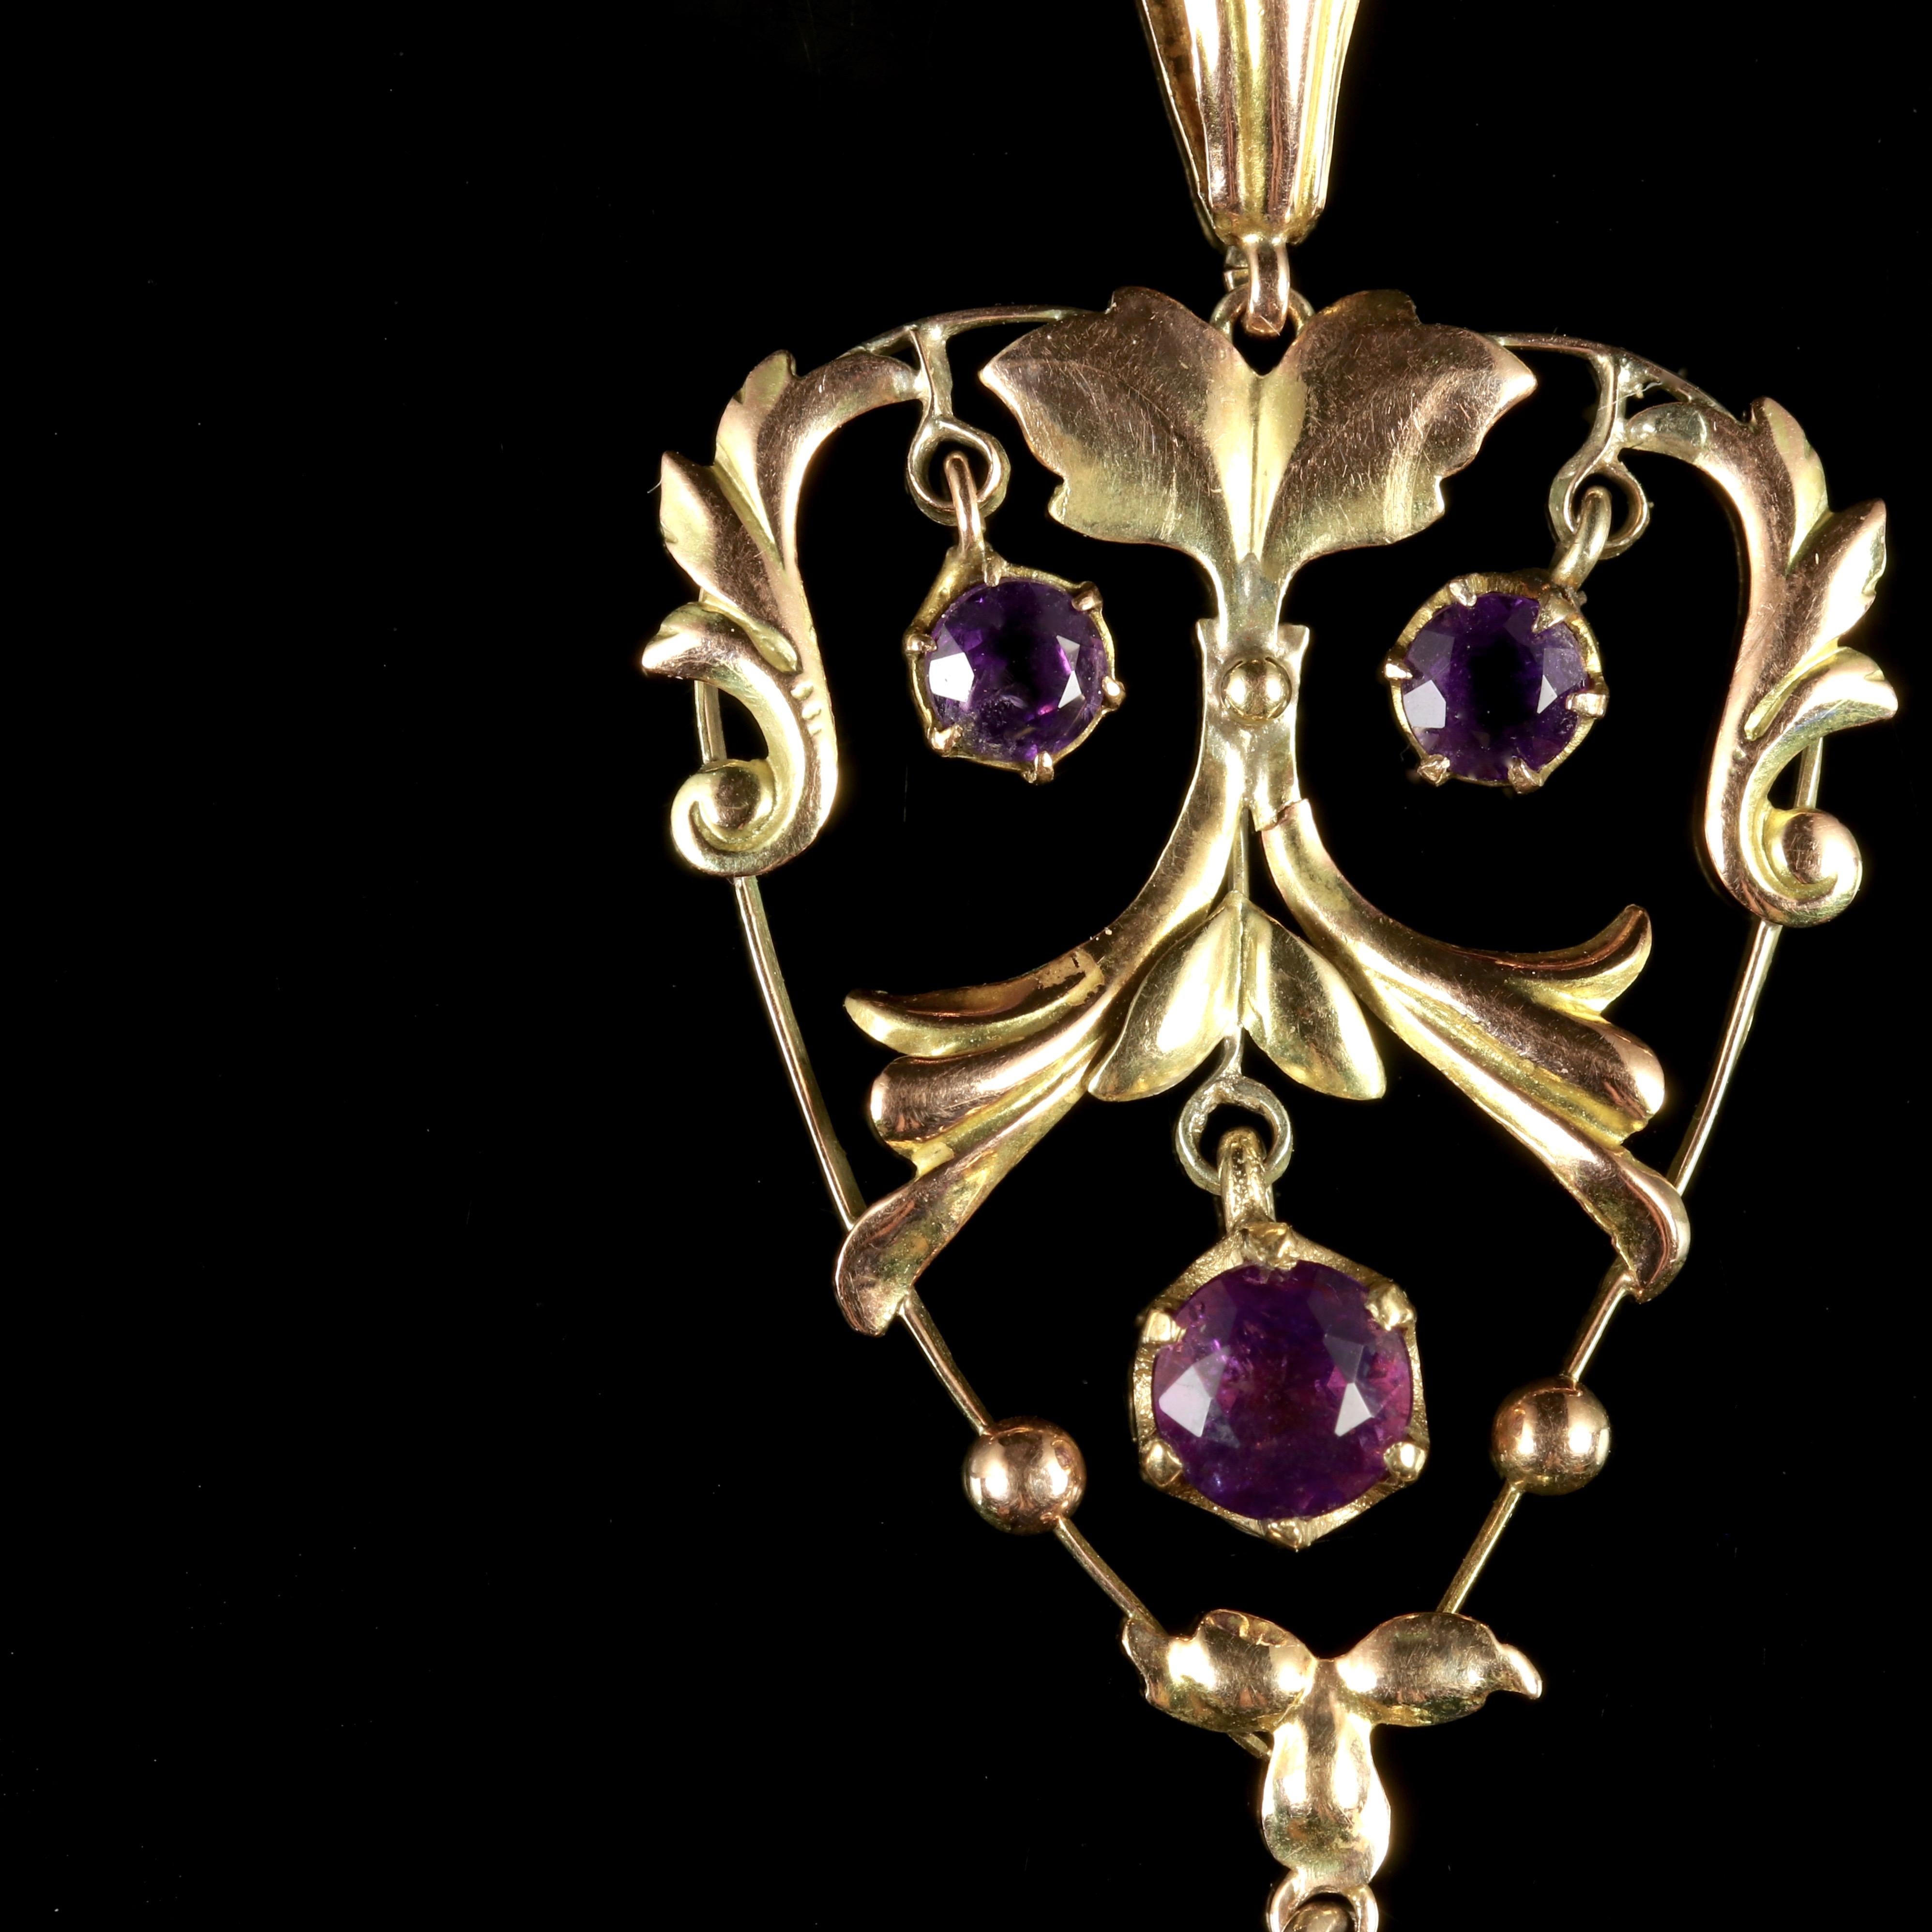 This beautiful Edwardian 9ct Yellow Gold pendant is Circa 1910.

The pendant boasts a pendulum of rich, purple Amethysts in a floral like gallery.

Three Amethysts cascade from the pendant.

The Pearl dropper has a lustrous sheen with a creamy